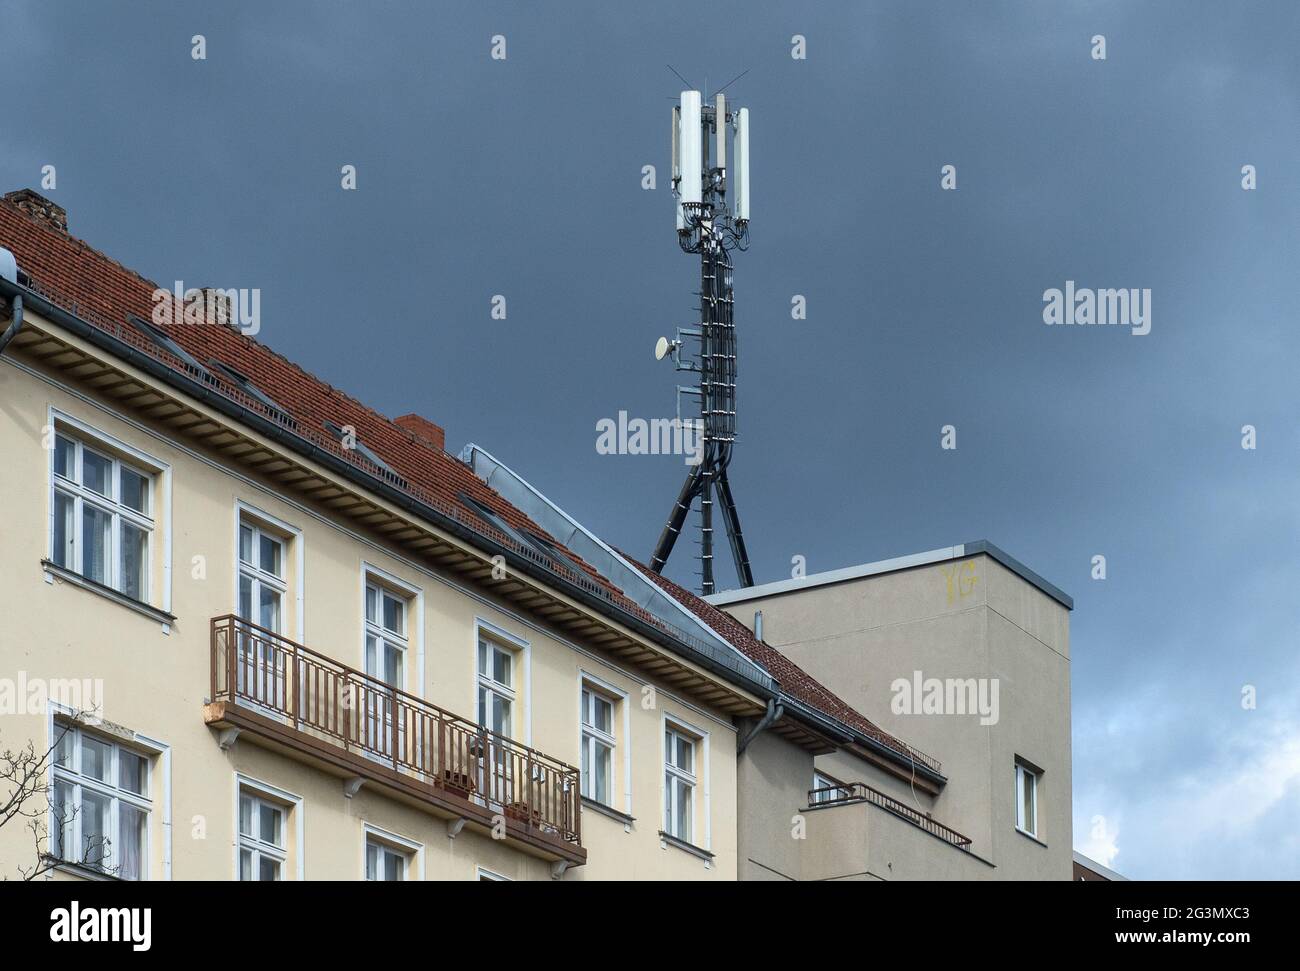 https://c8.alamy.com/comp/2G3MXC3/13042021-berlin-berlin-germany-mitte-mobile-phone-antennas-on-the-roof-of-a-residential-building-0ce210413d001caroexjpg-model-release-no-2G3MXC3.jpg